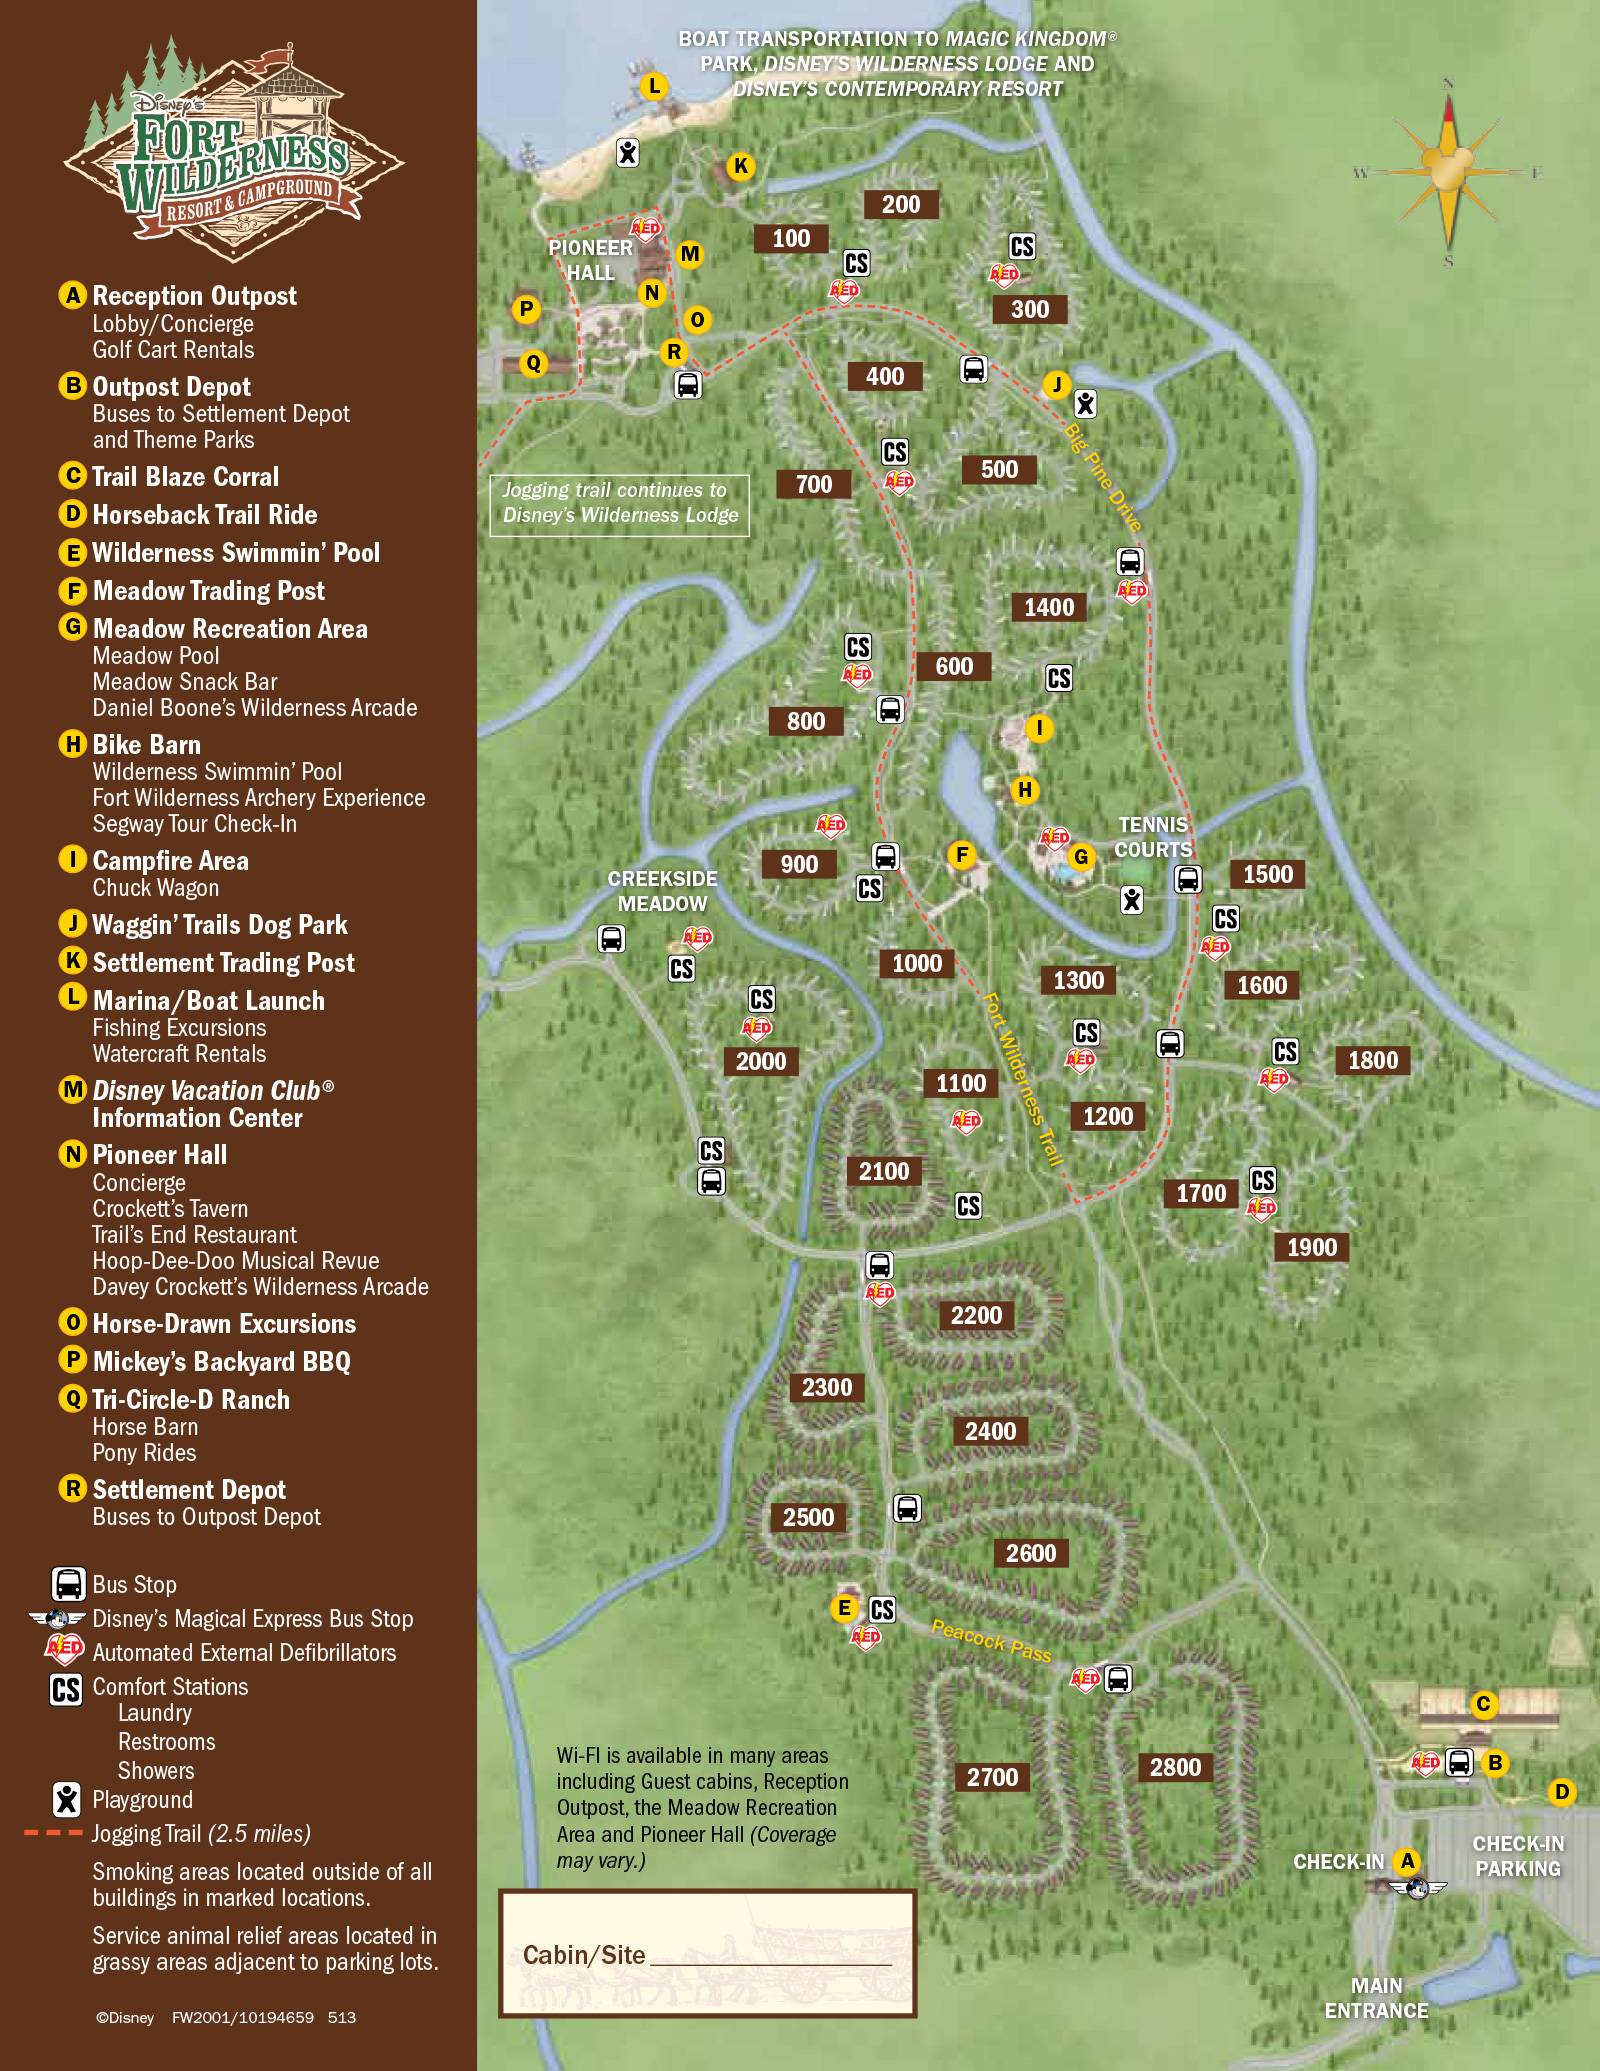 2013 Fort Wilderness guide map